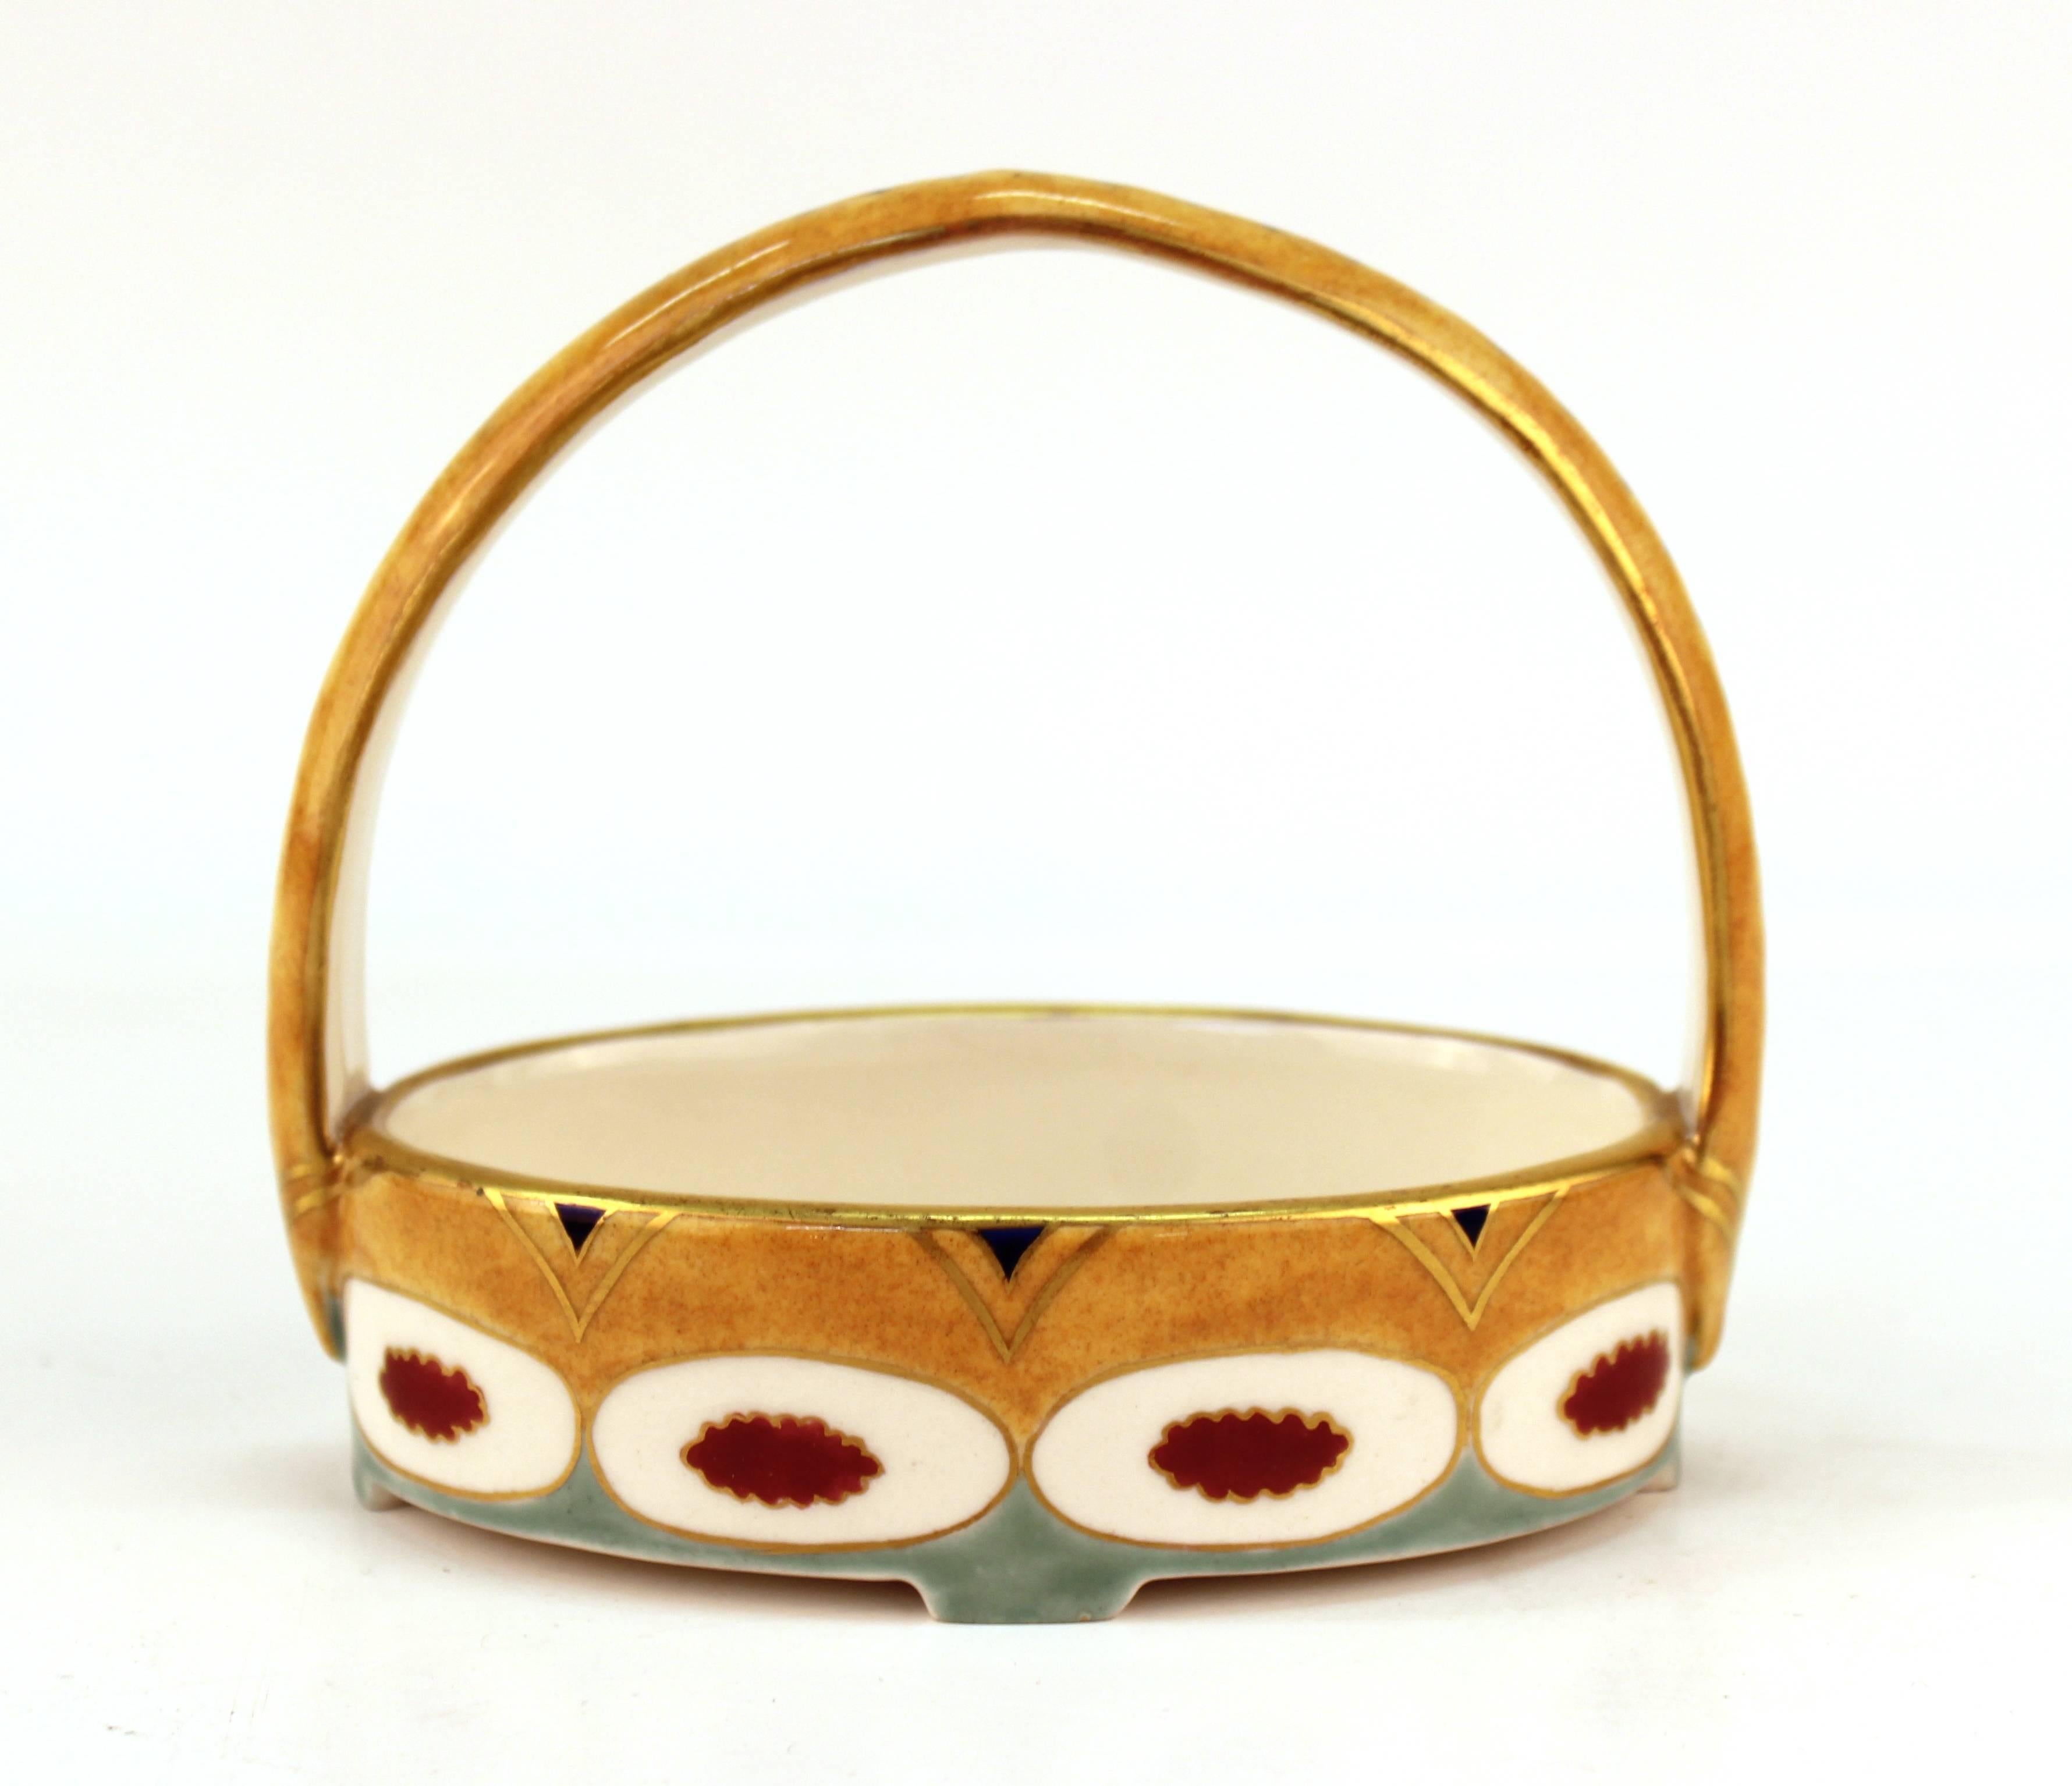 Wahliss Viennese Secession porcelain basket-form dish with gilt accents, designed by architect Karl Klaus in Vienna. Mark underneath. Minor wear to the glaze.